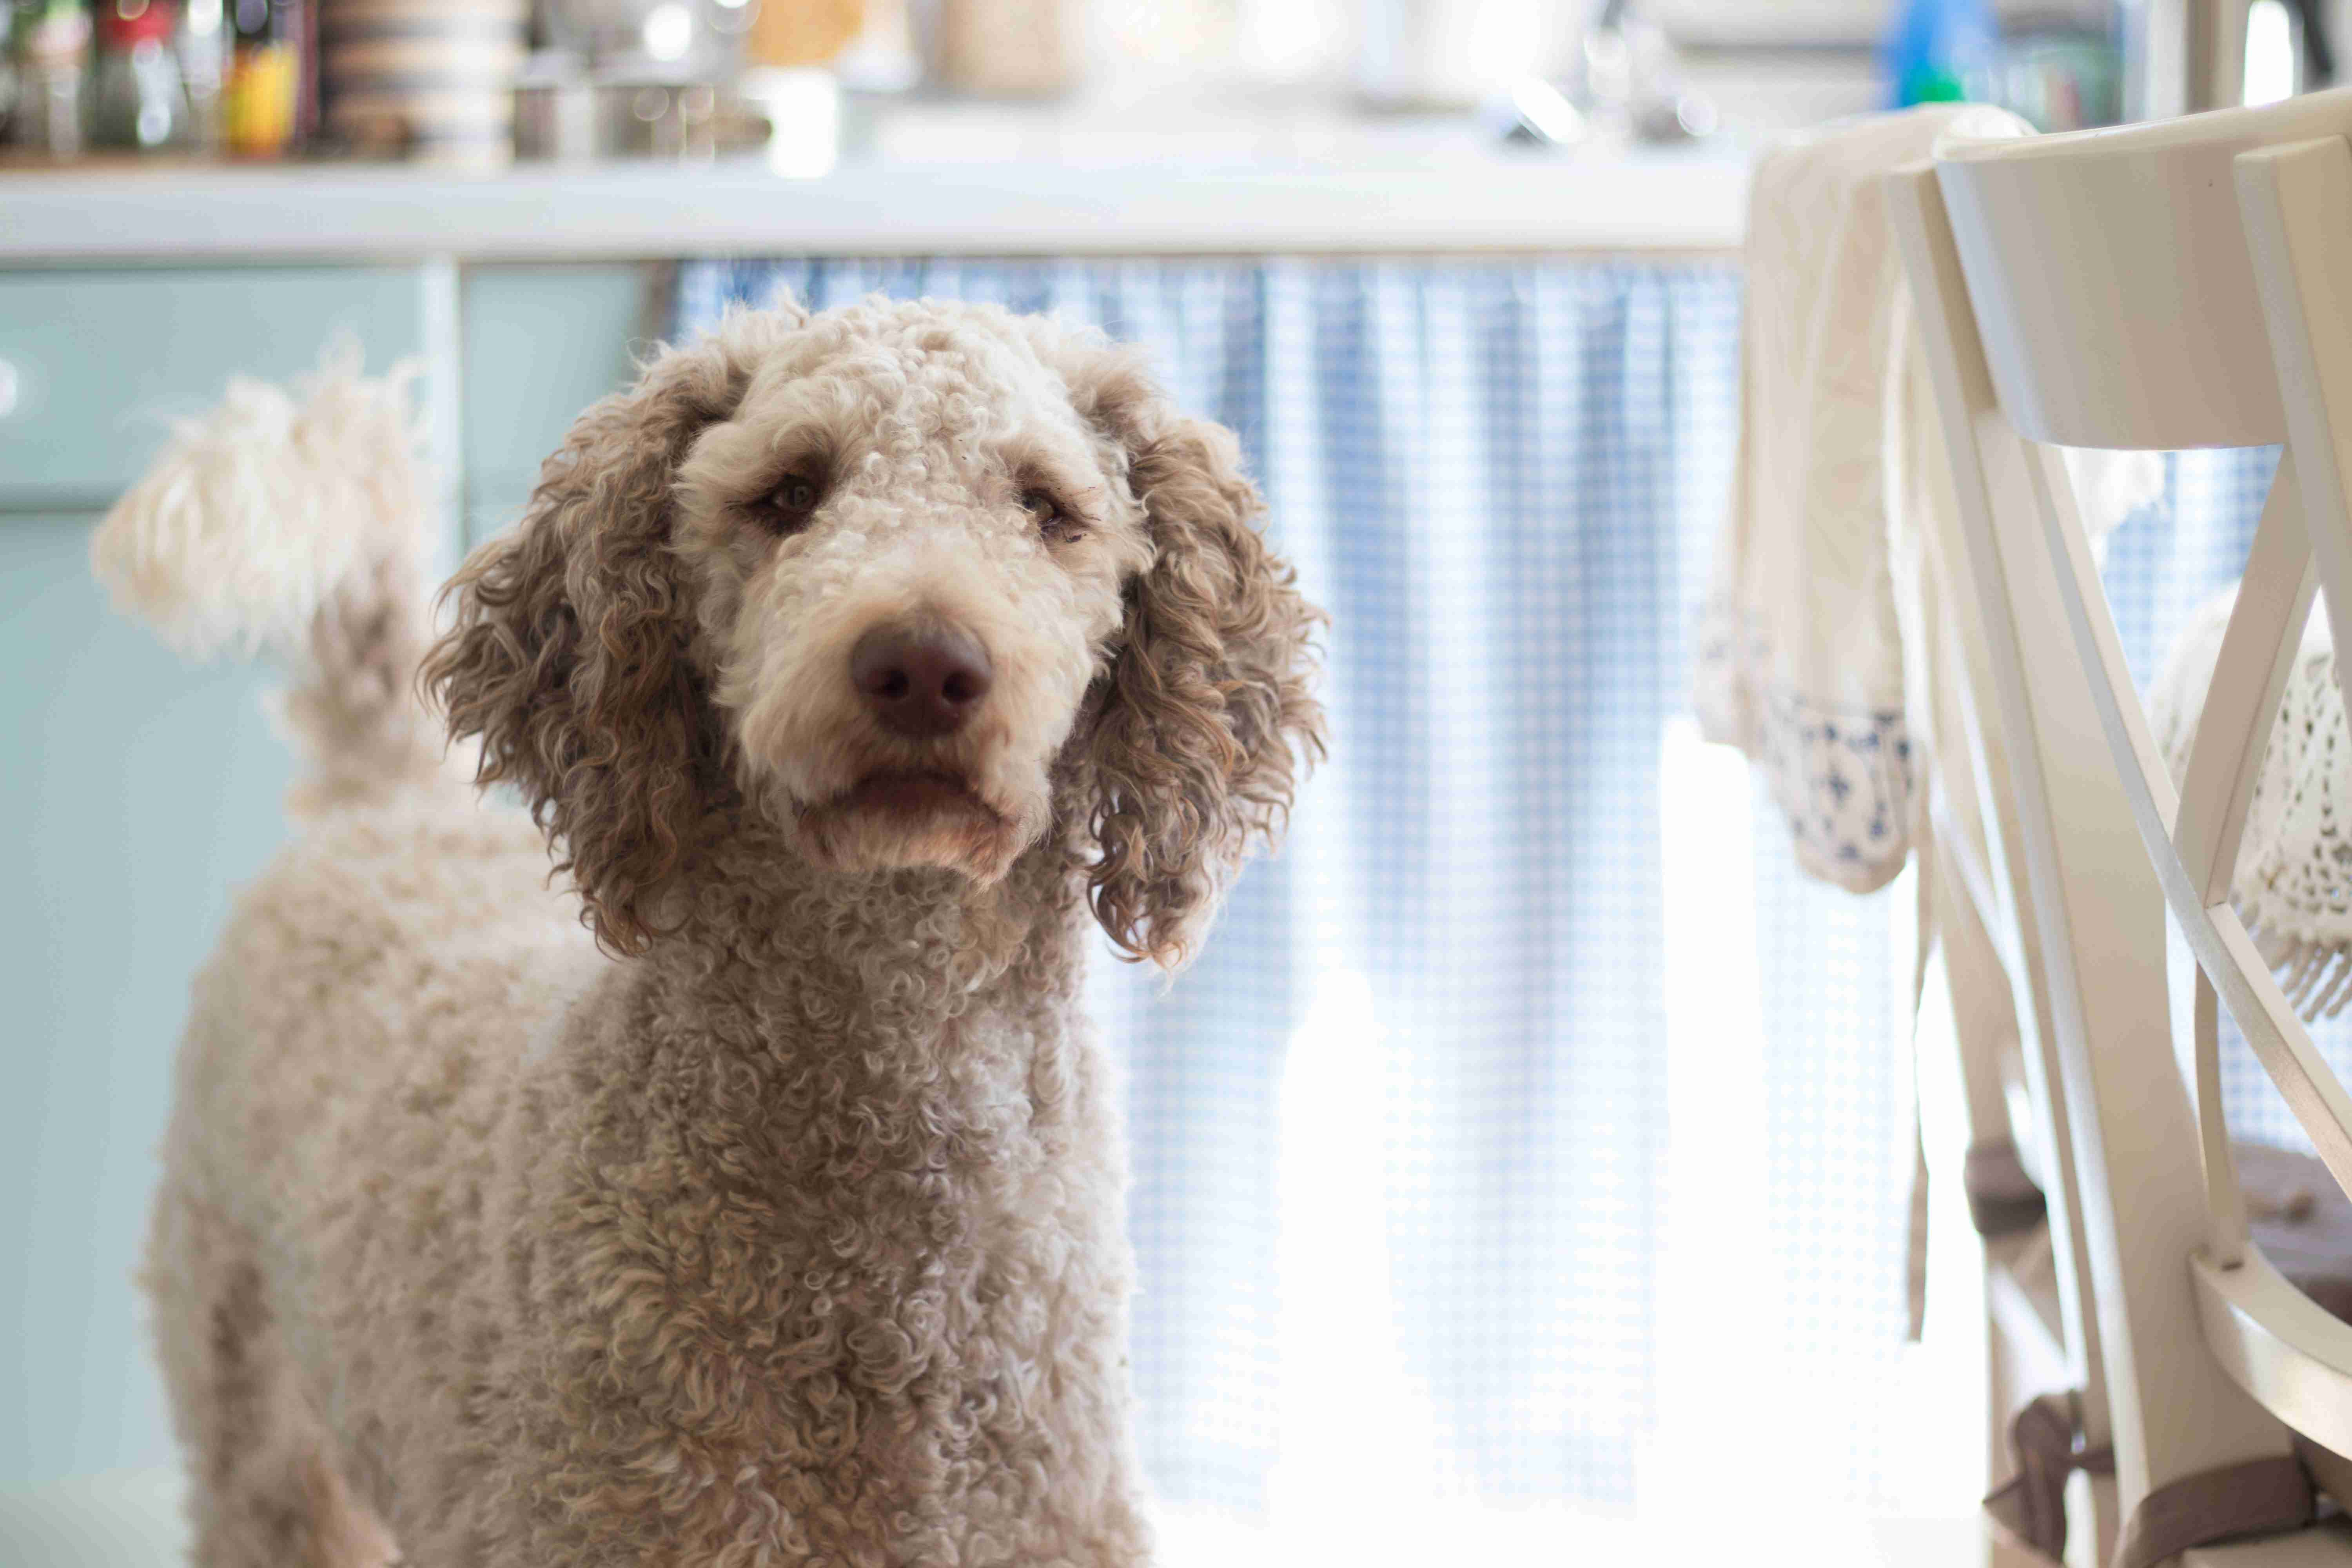 Are there any specific respiratory issues that Poodles may experience?